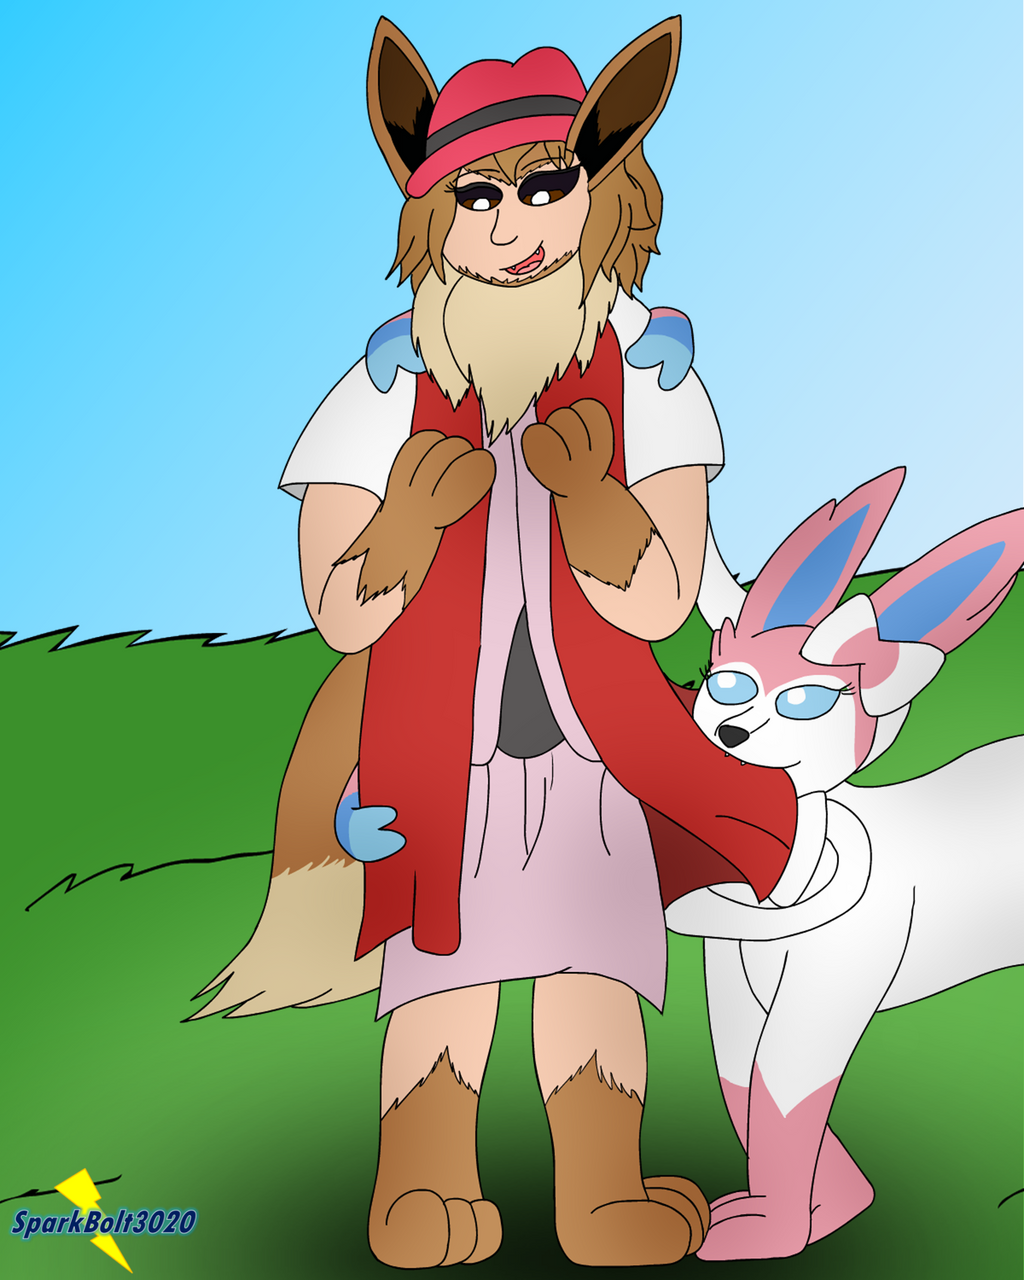 Serena soul Eevee and XY by Bc320903871 on DeviantArt